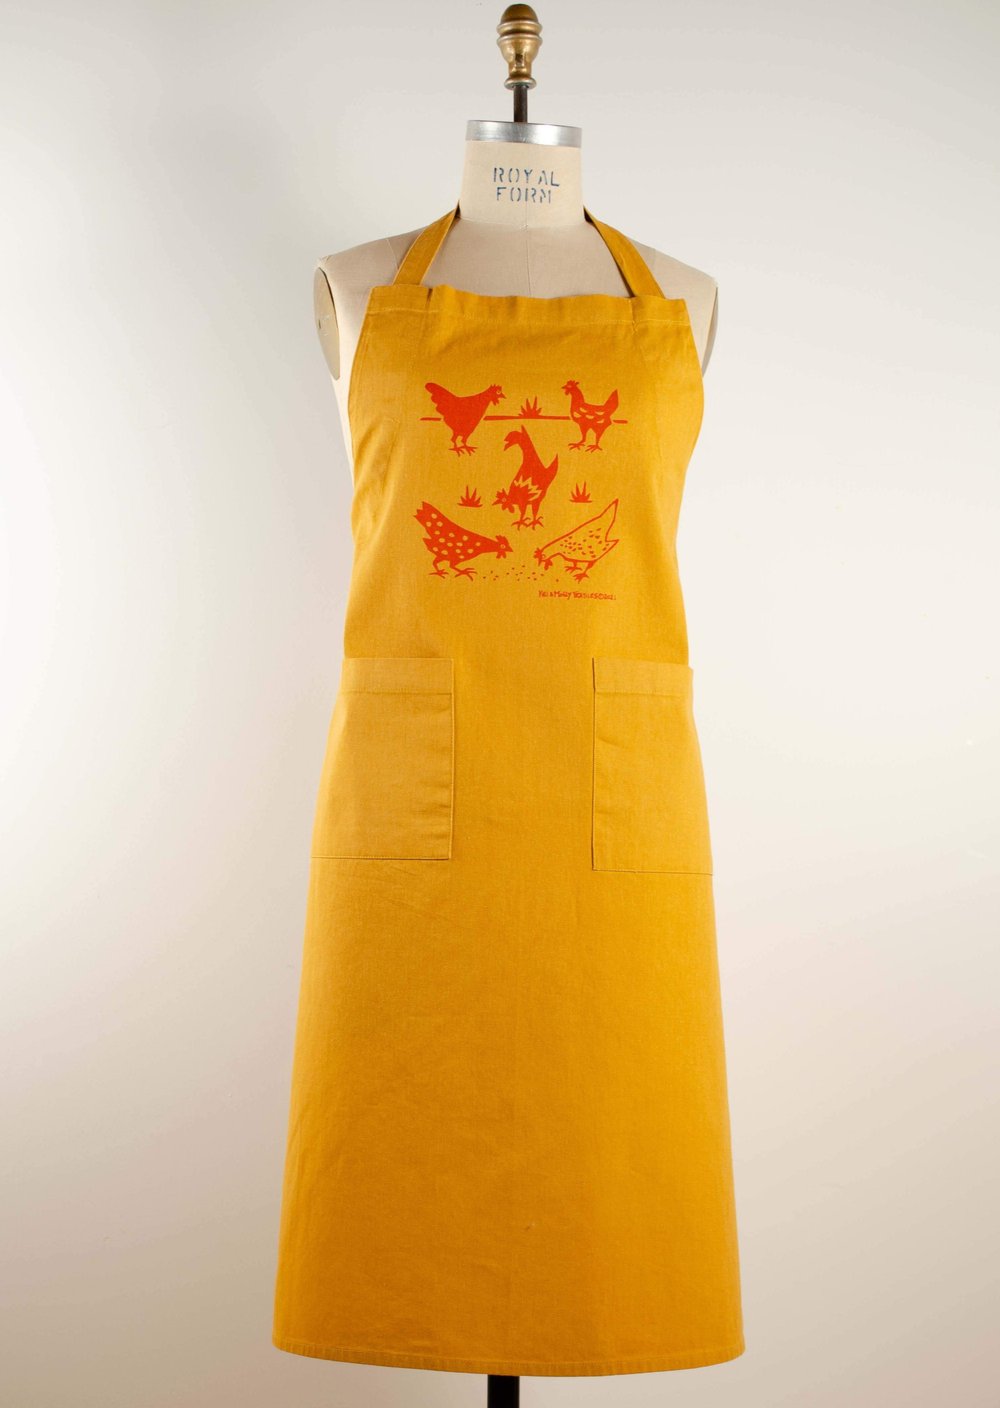 Kei & Molly Stonewashed Apron: Chickens